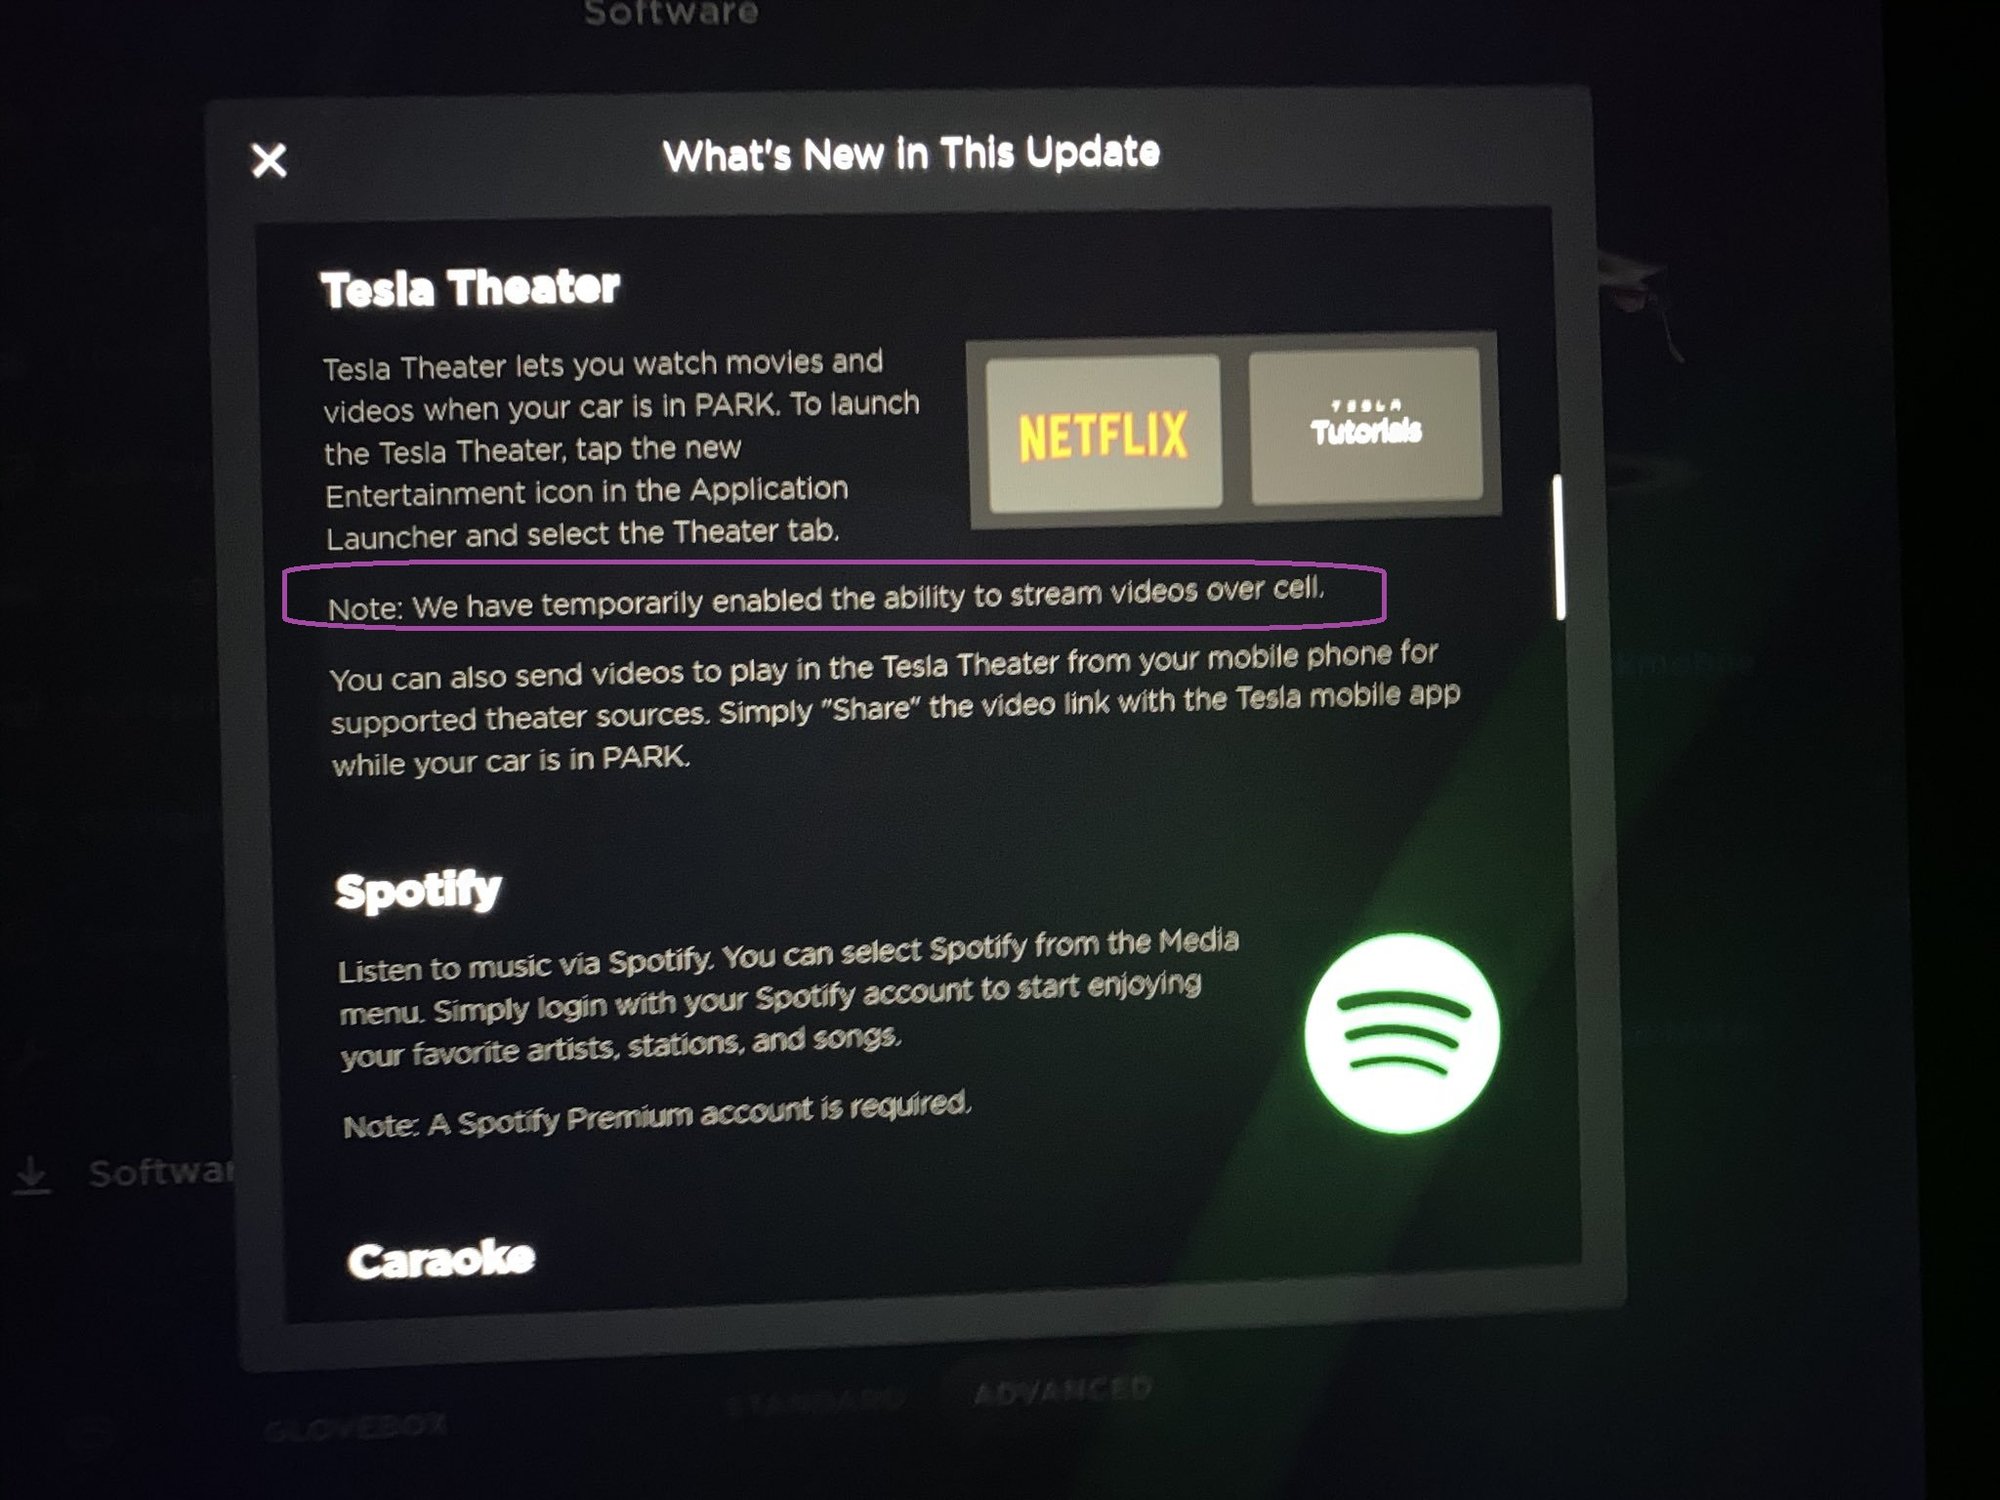 Tesla Theater Release Notes Highlighted.jpg